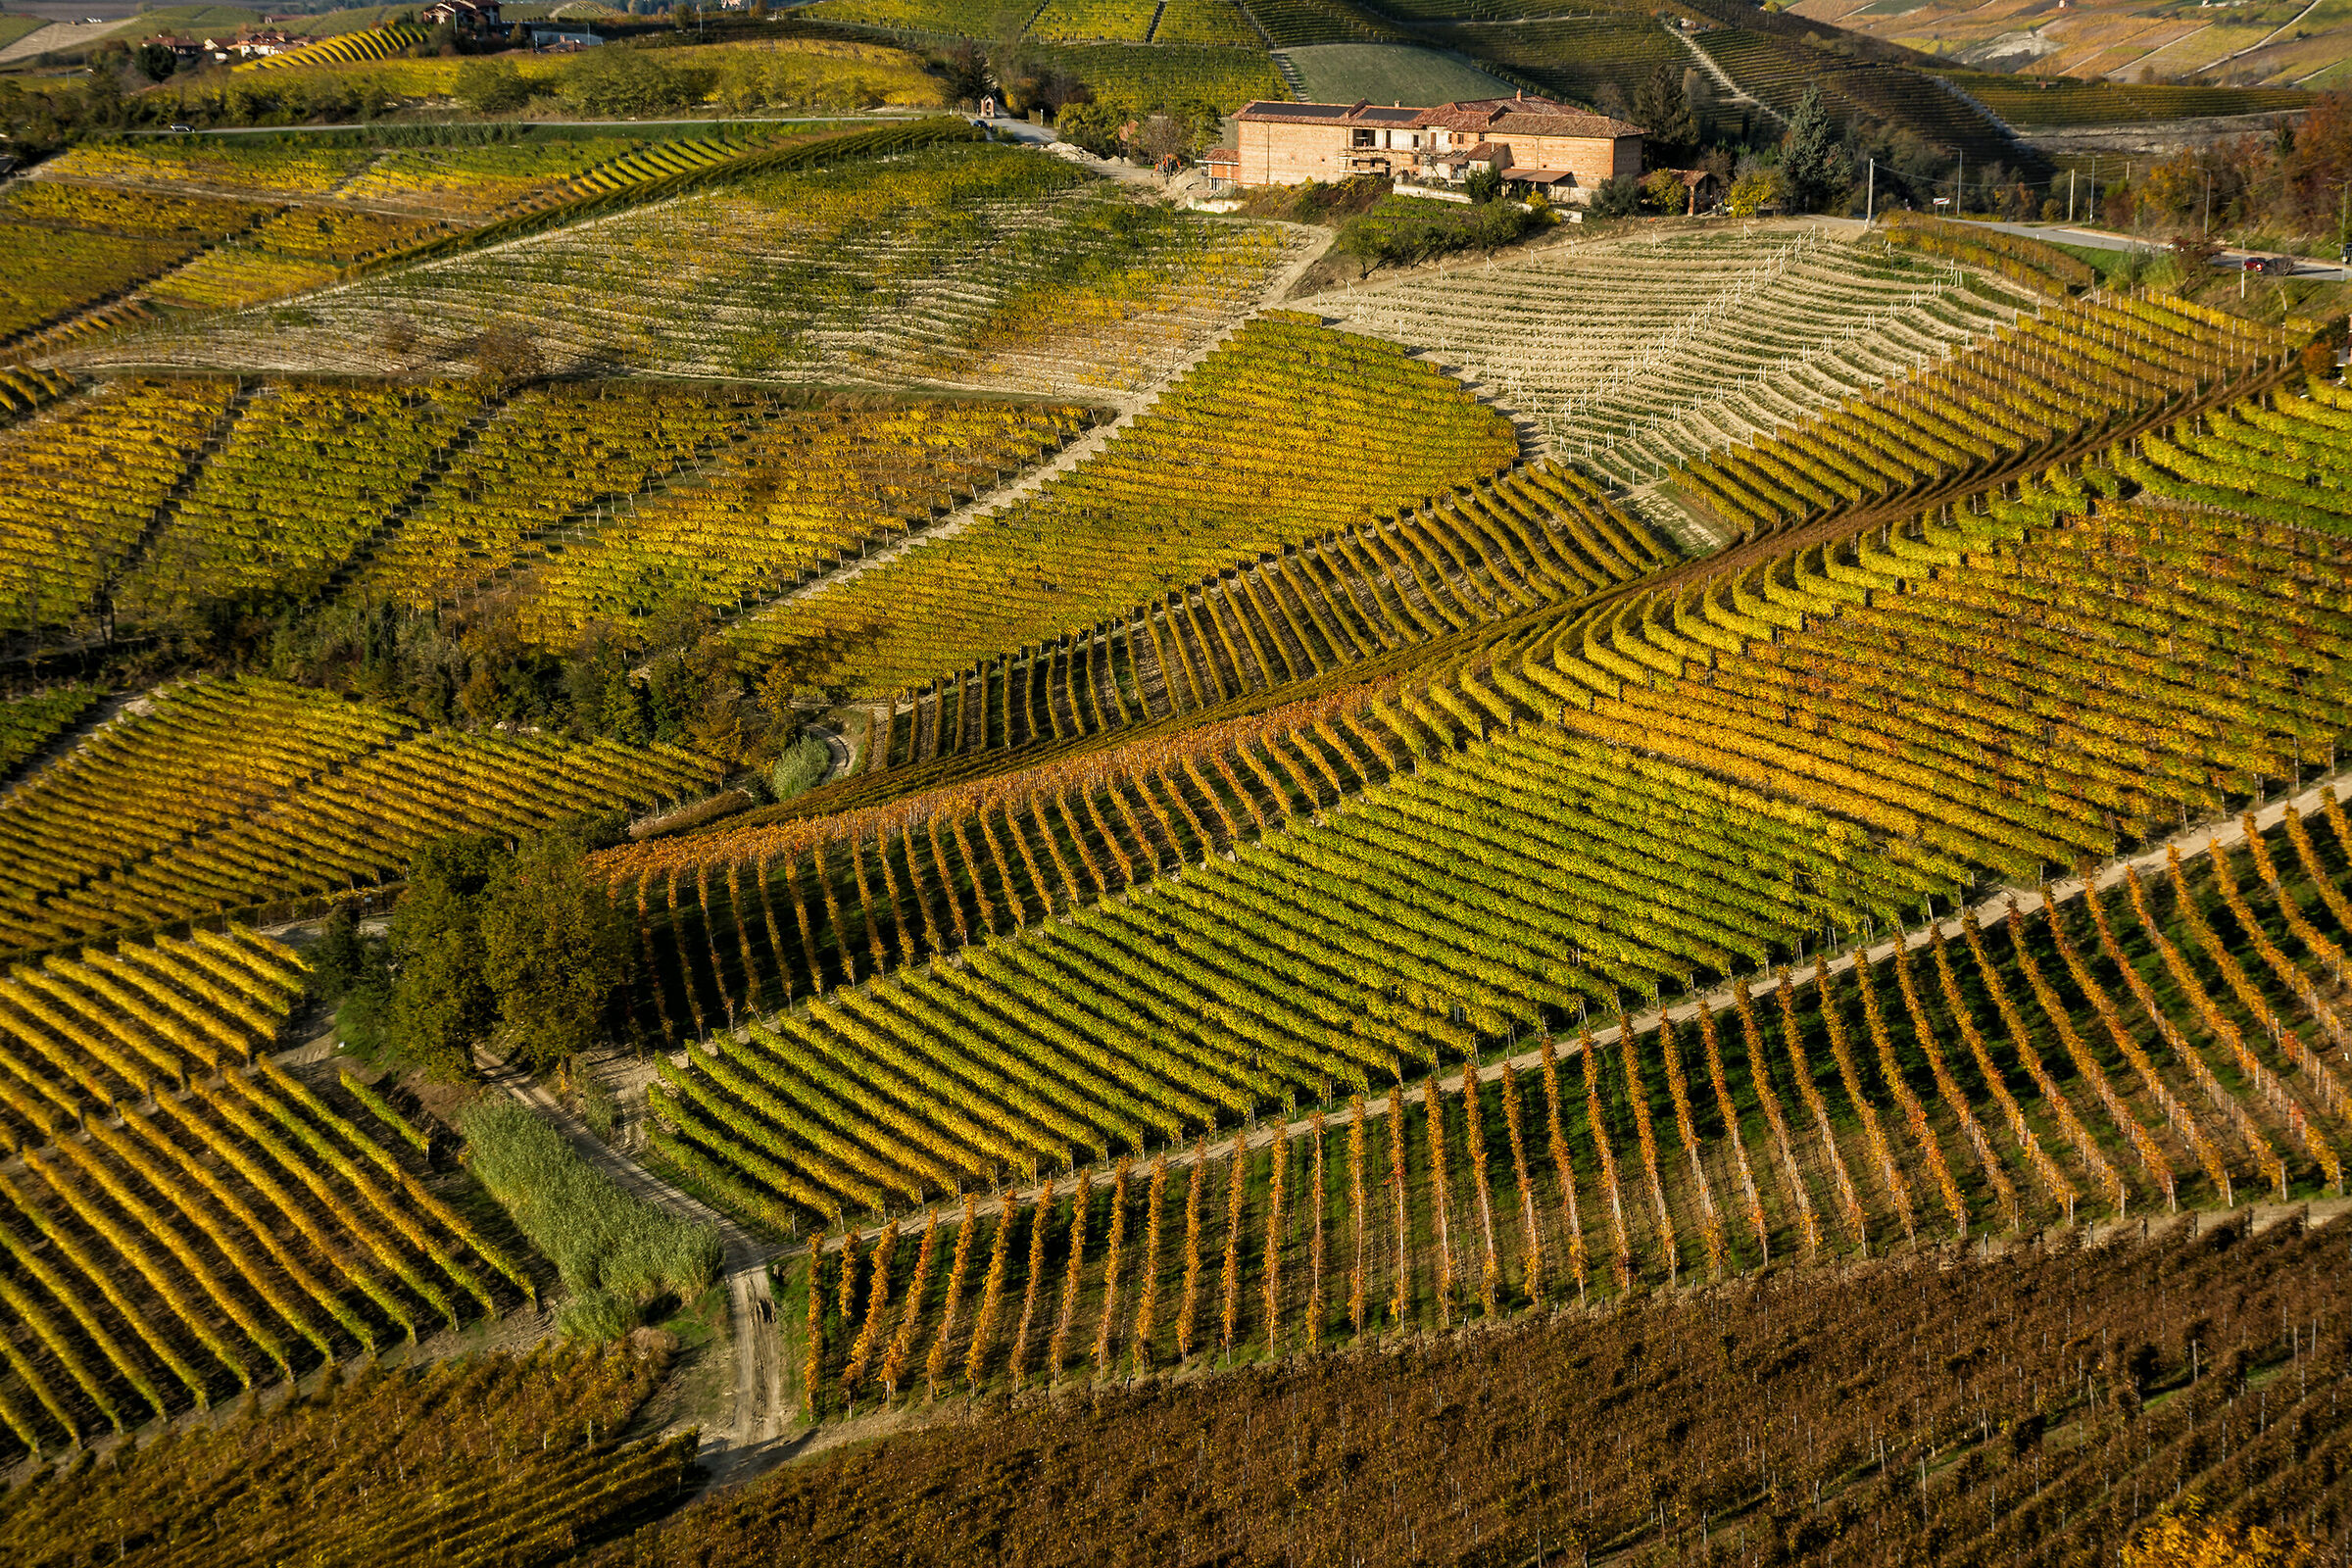 The geometry of the vineyards...